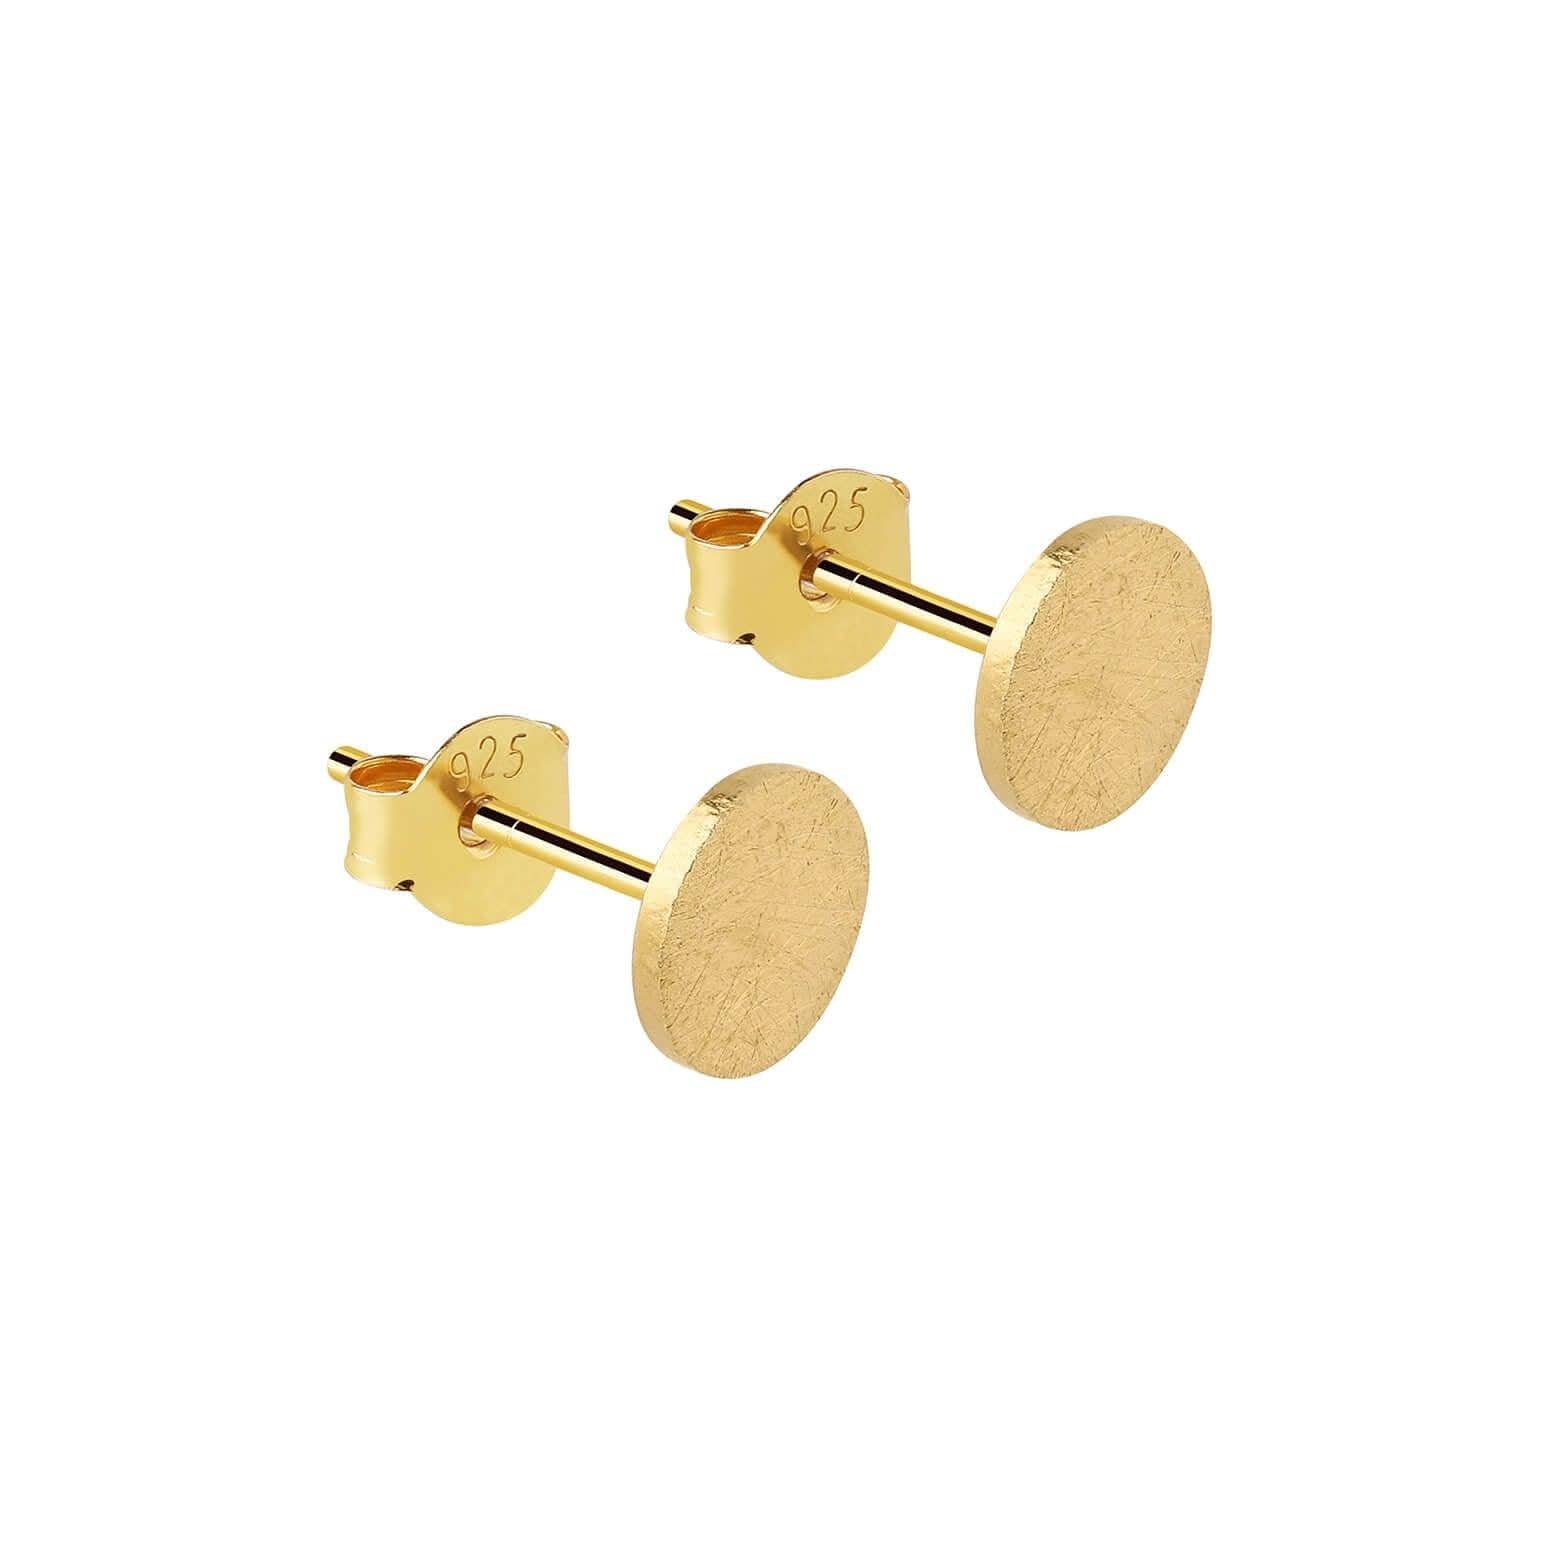 Matte gold plated 7mm Coin Stud Earring